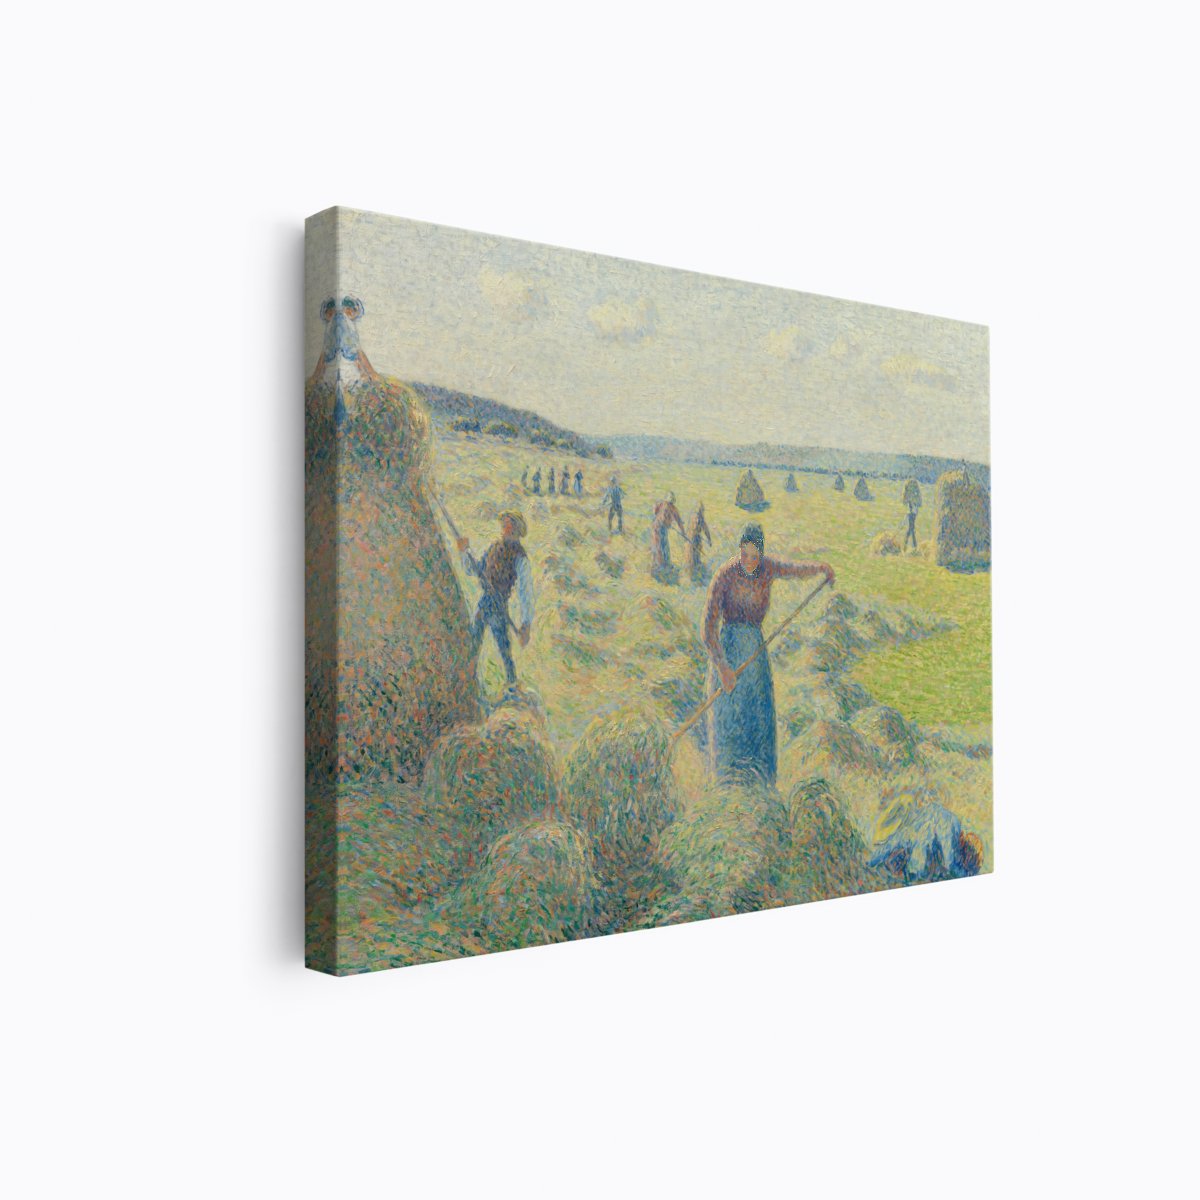 Collecting the Yield | Camille Pissarro | Ave Legato | Canvas Art Prints | Vintage Artwork